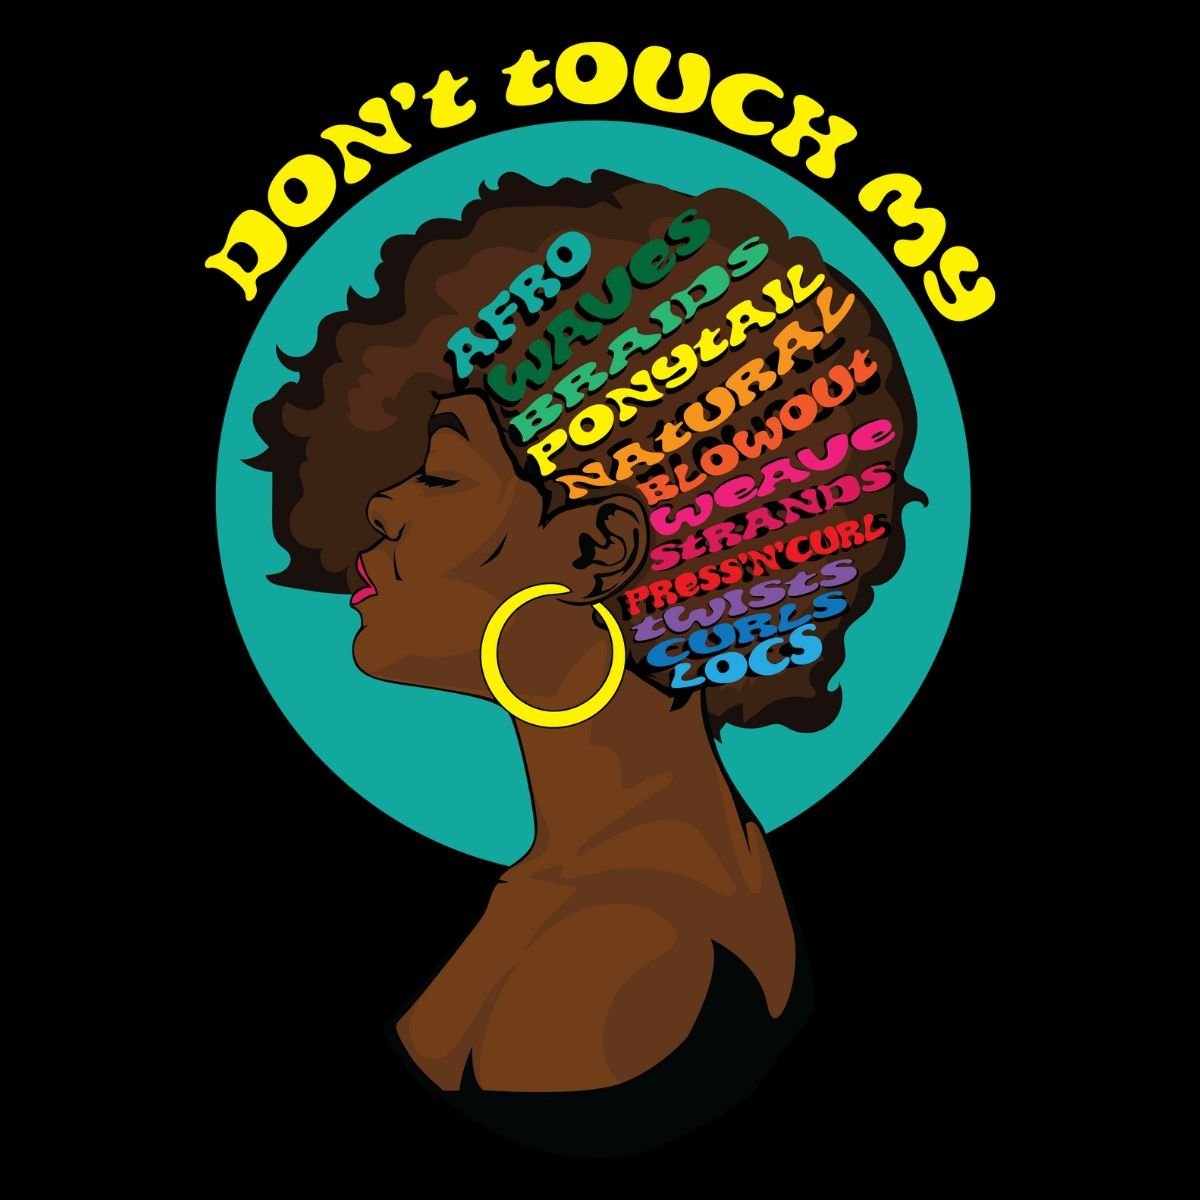 Graphic Tank - Don't Touch My Curls - Sizes 2XL-XS - dom+bomb